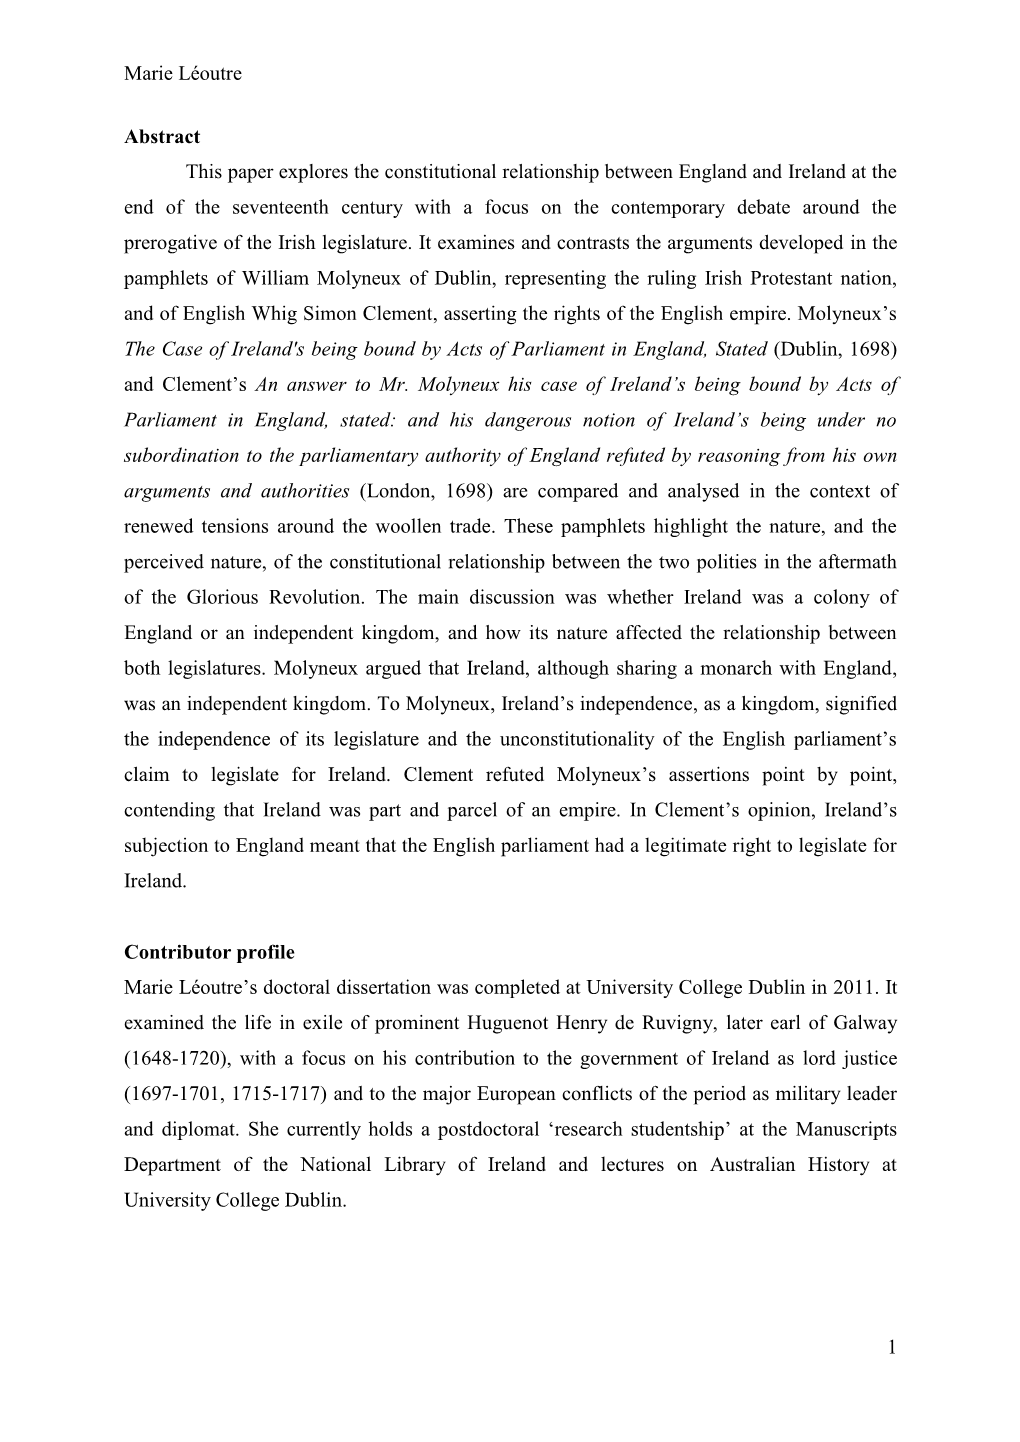 Marie Léoutre 1 Abstract This Paper Explores the Constitutional